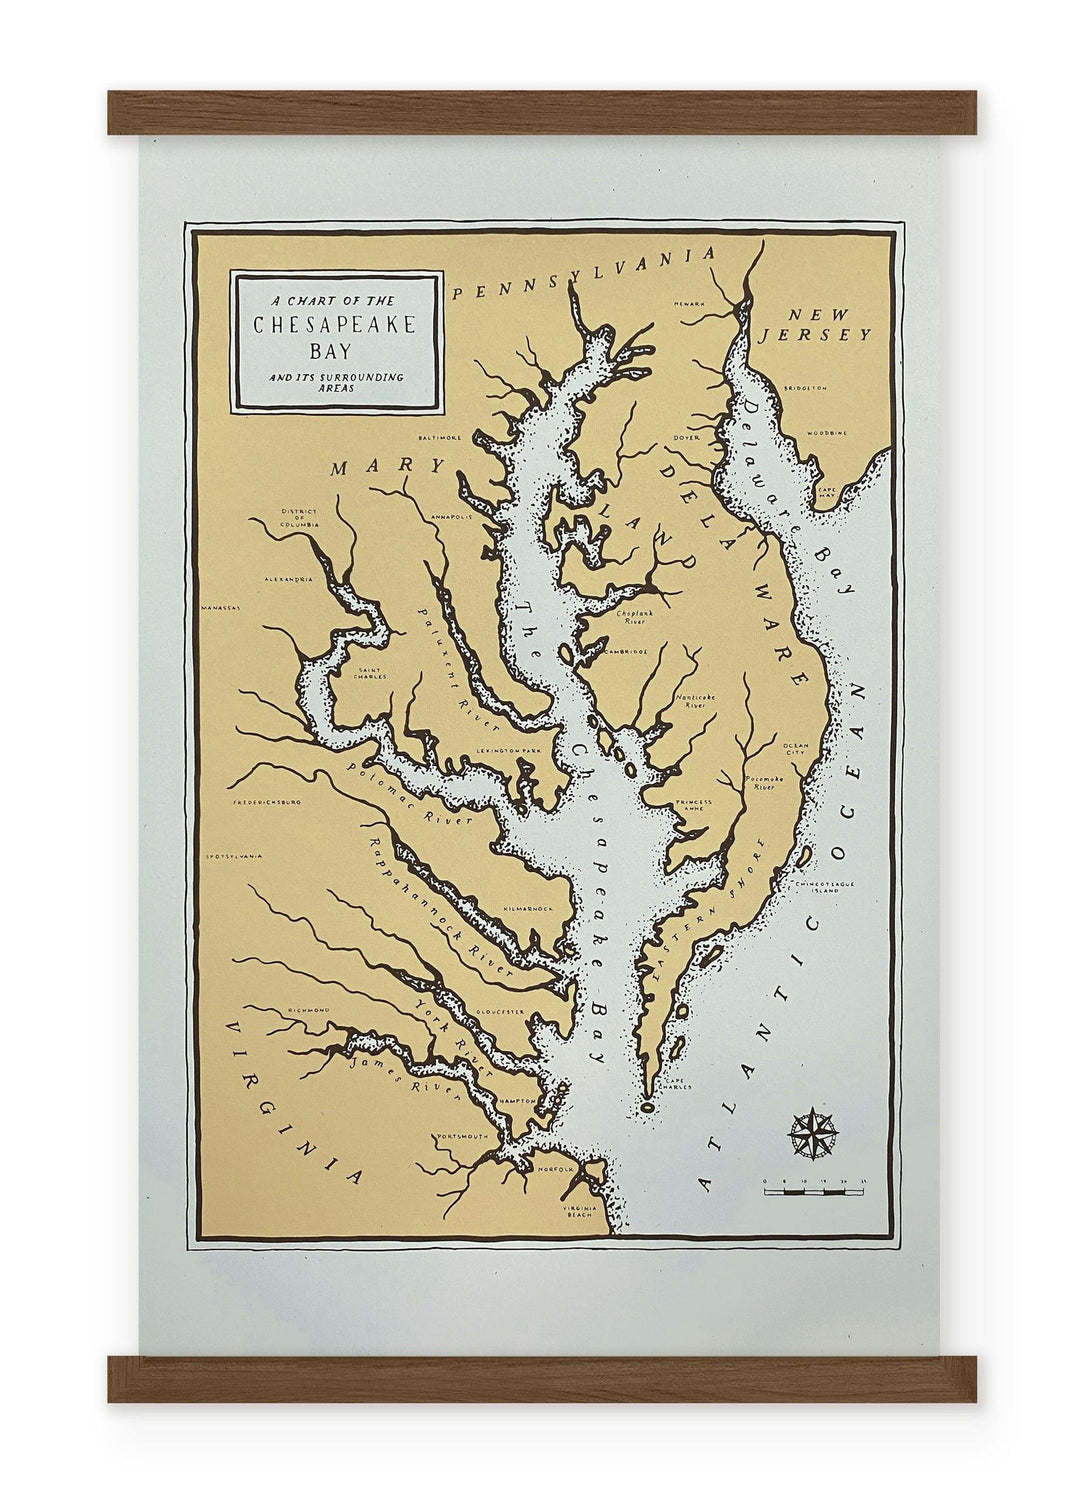 A Chesapeake Bay Map 11x17 Print of Maryland, Virginia and the Rappahannock river by The Wild Wander.